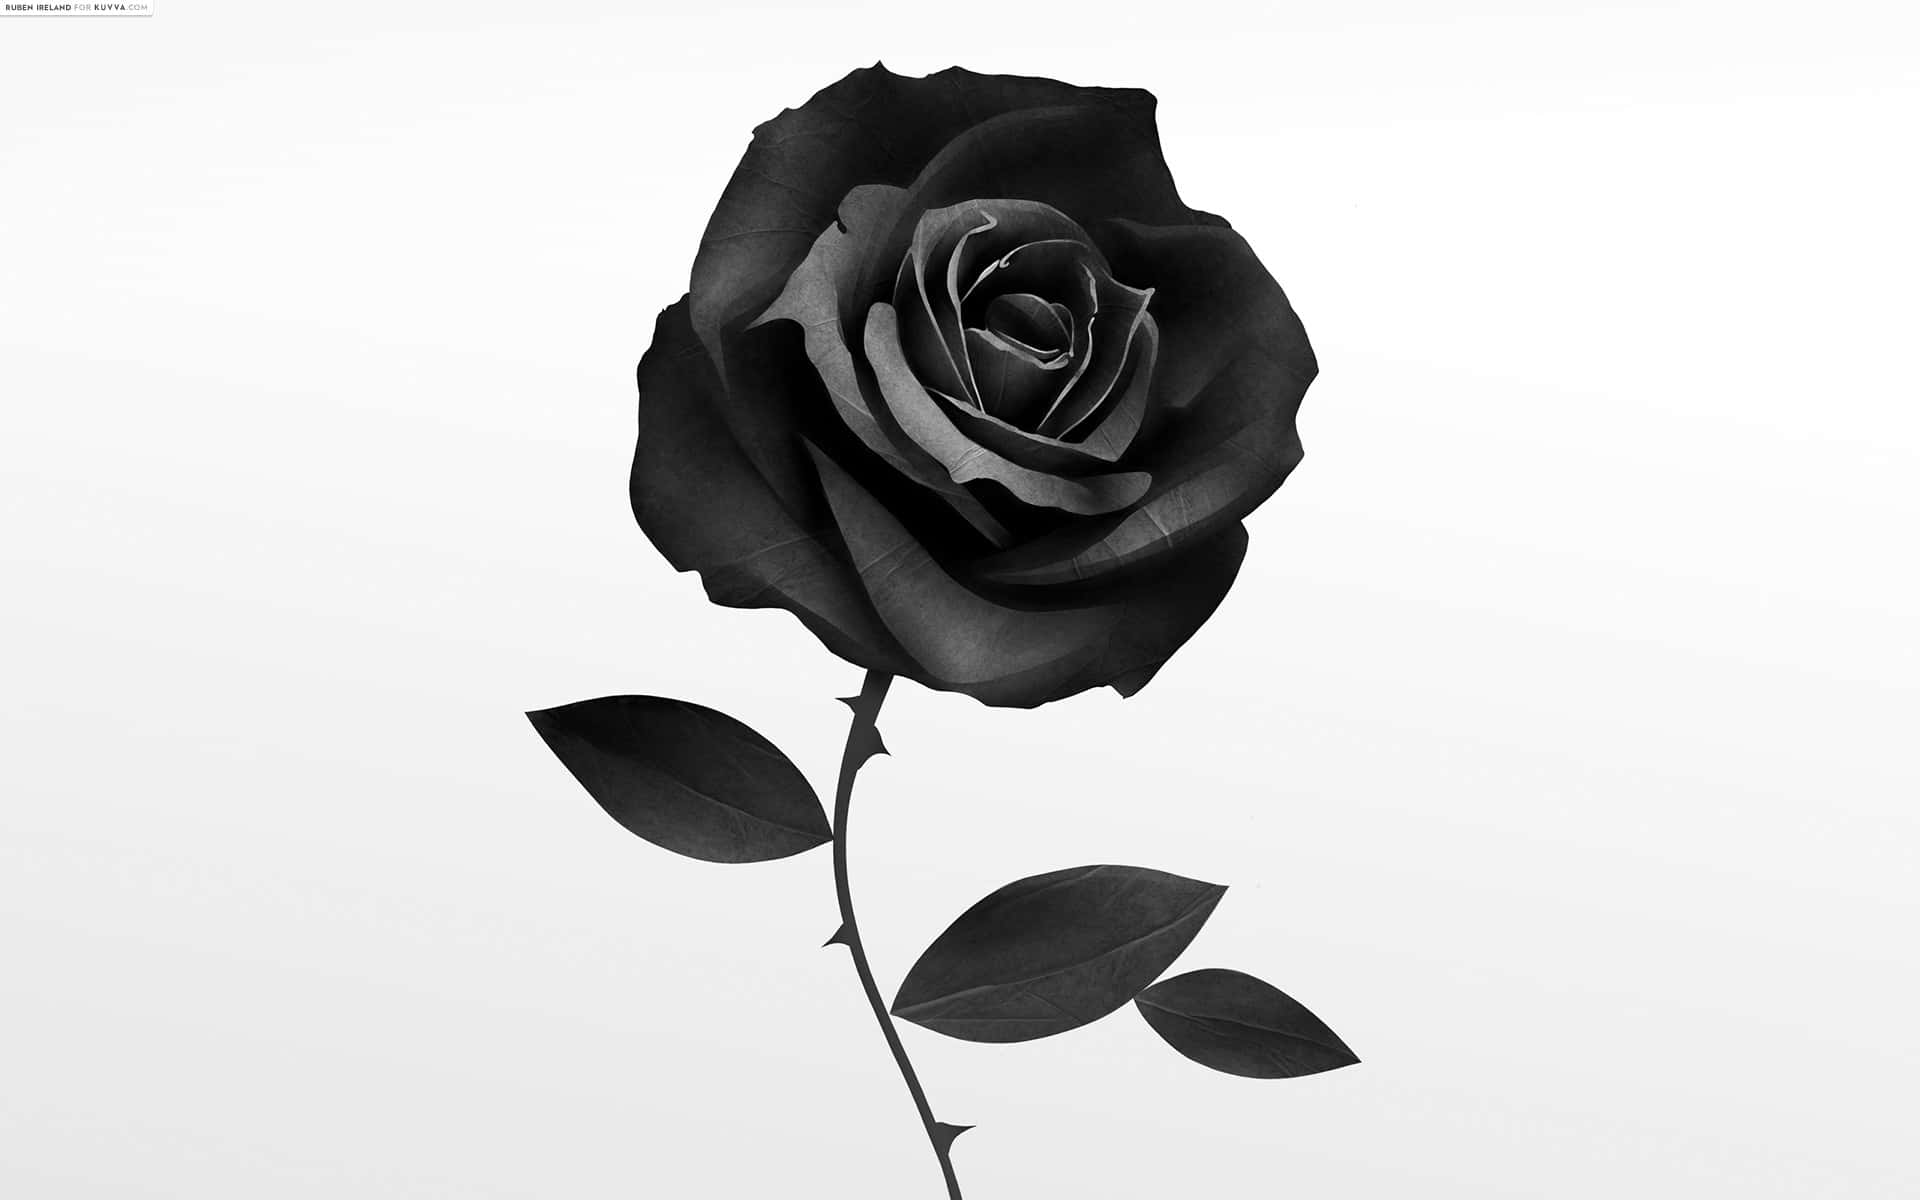 "A dainty and delicate Black Flower"